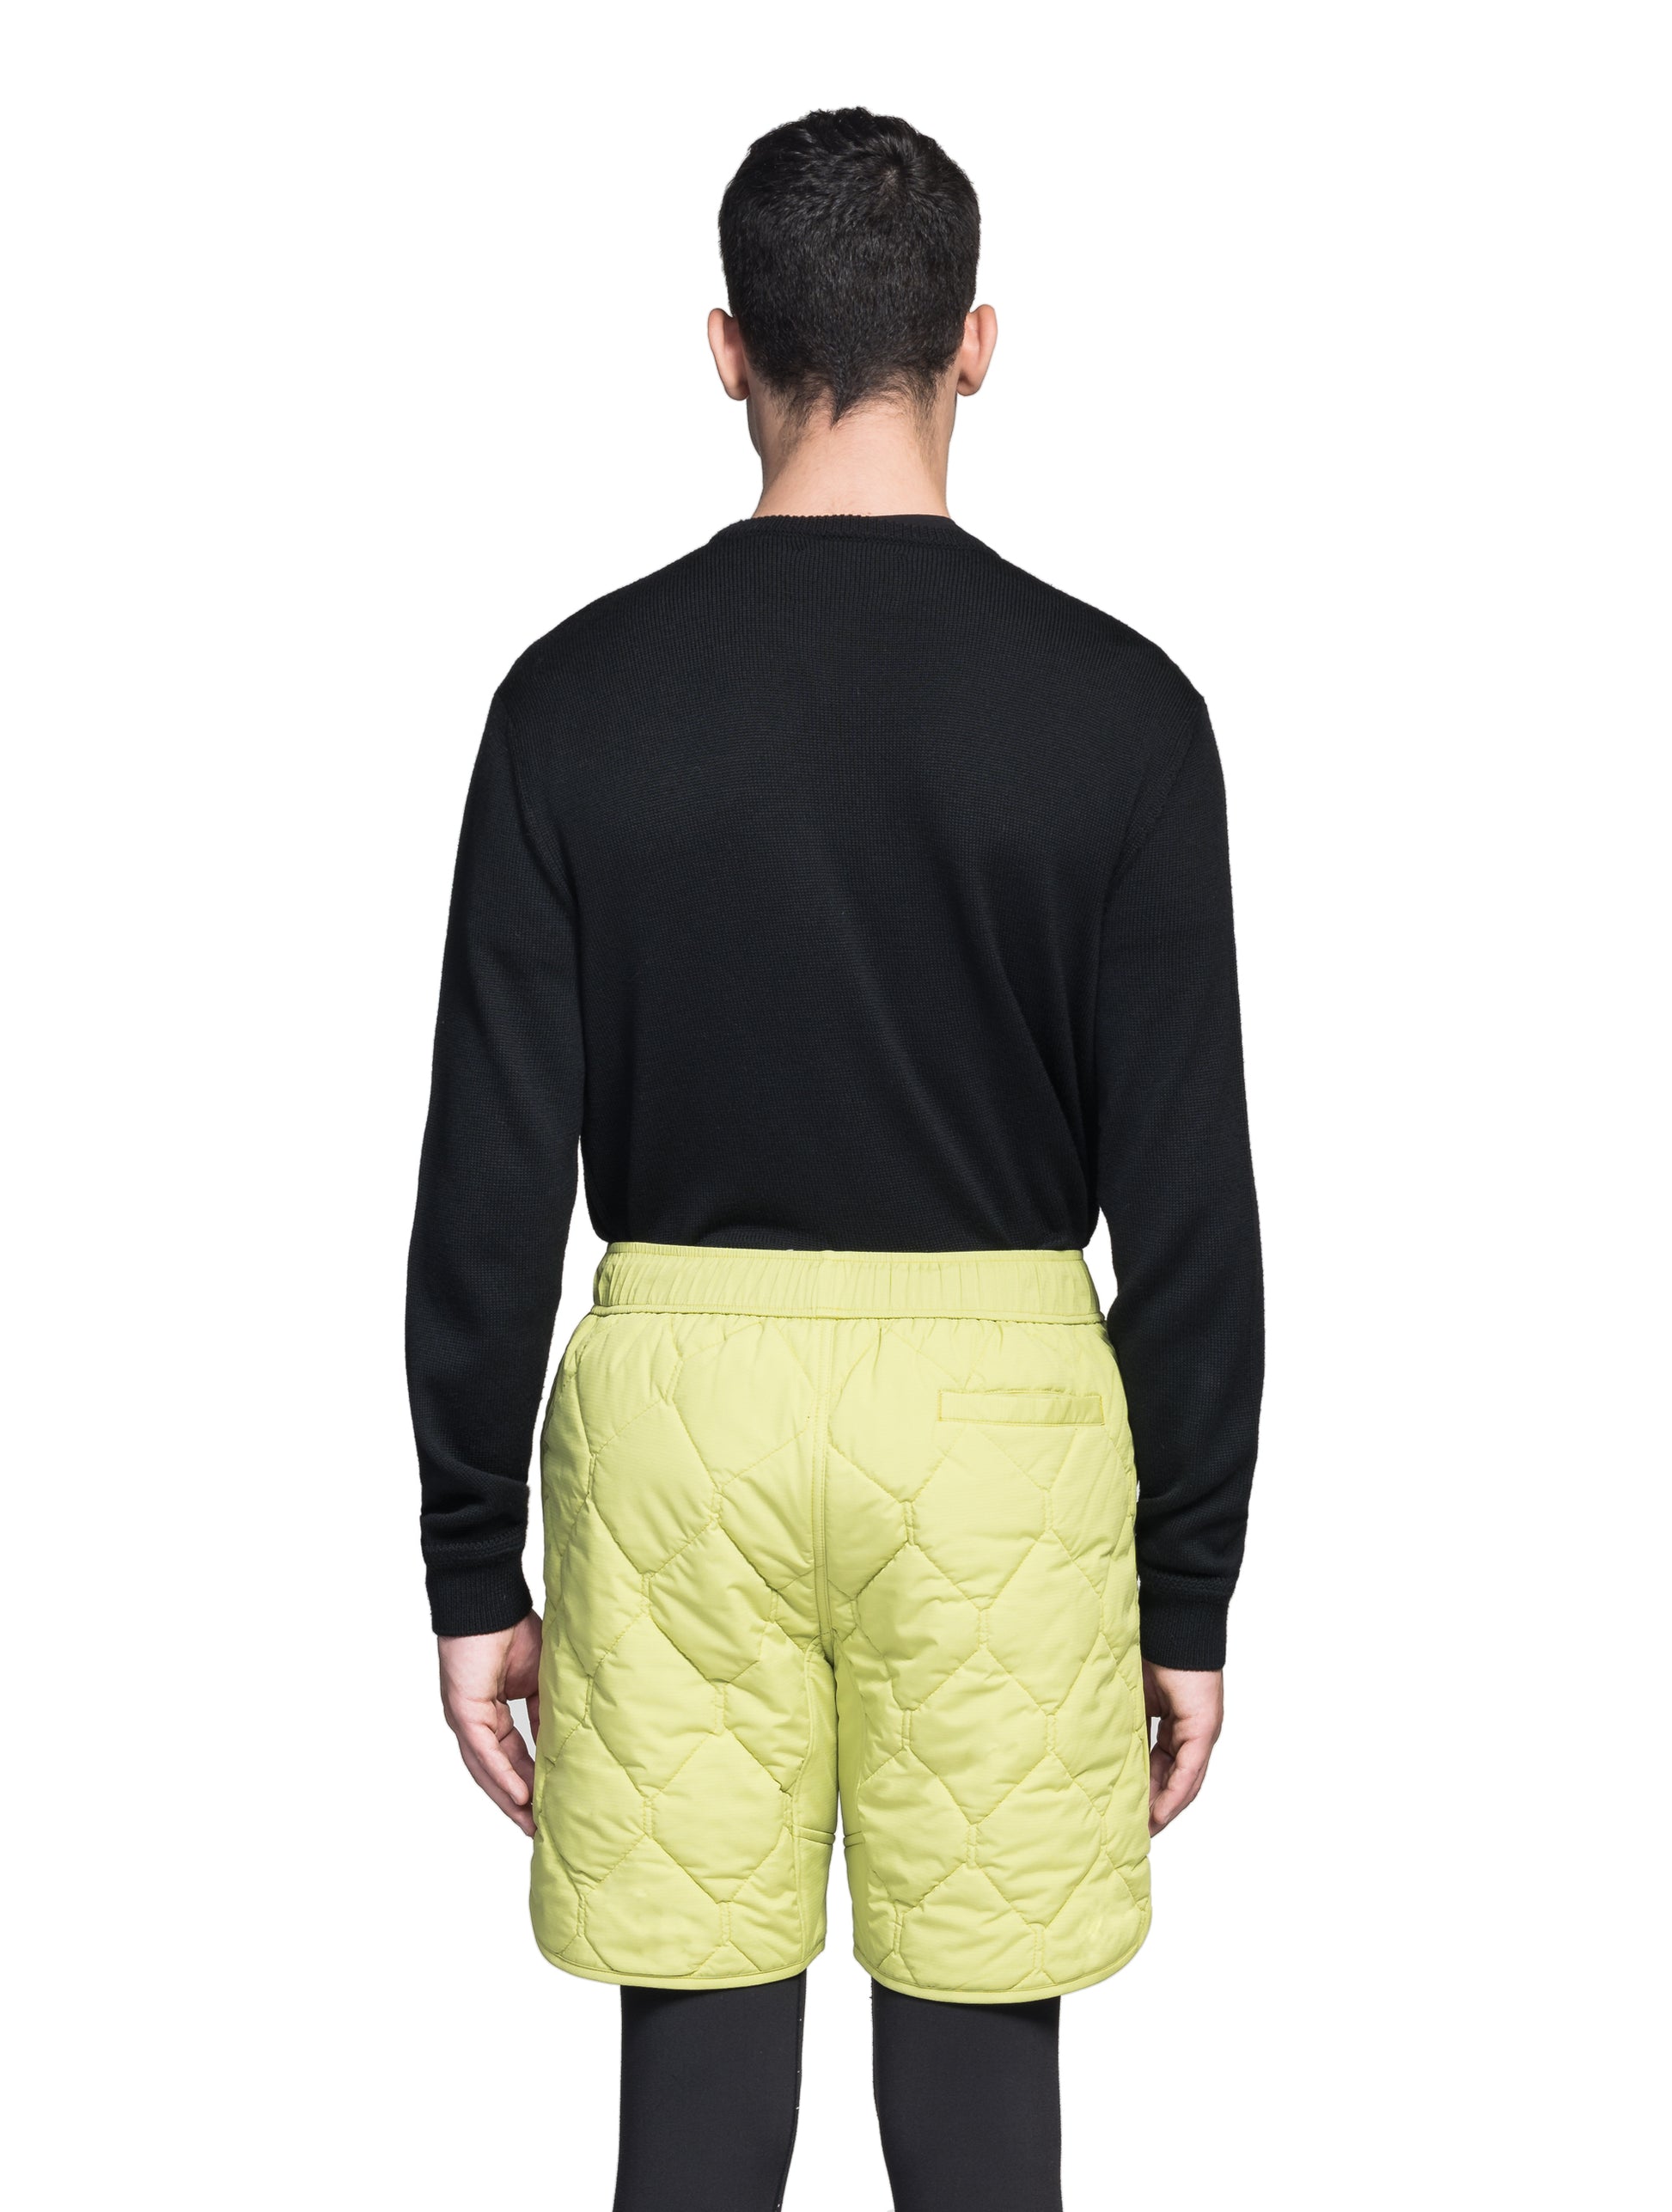 Curt Men's Performance Quilted Shorts at knee length, premium stretch nylon and stretch ripstop fabricaiton, premium 4-way stretch, water resistant Primaloft Gold Insulation Active+, side seam pockets, exteriror back pocket, elasticized waist with drawcords, and notch detailing at side seams, in Dark Citron